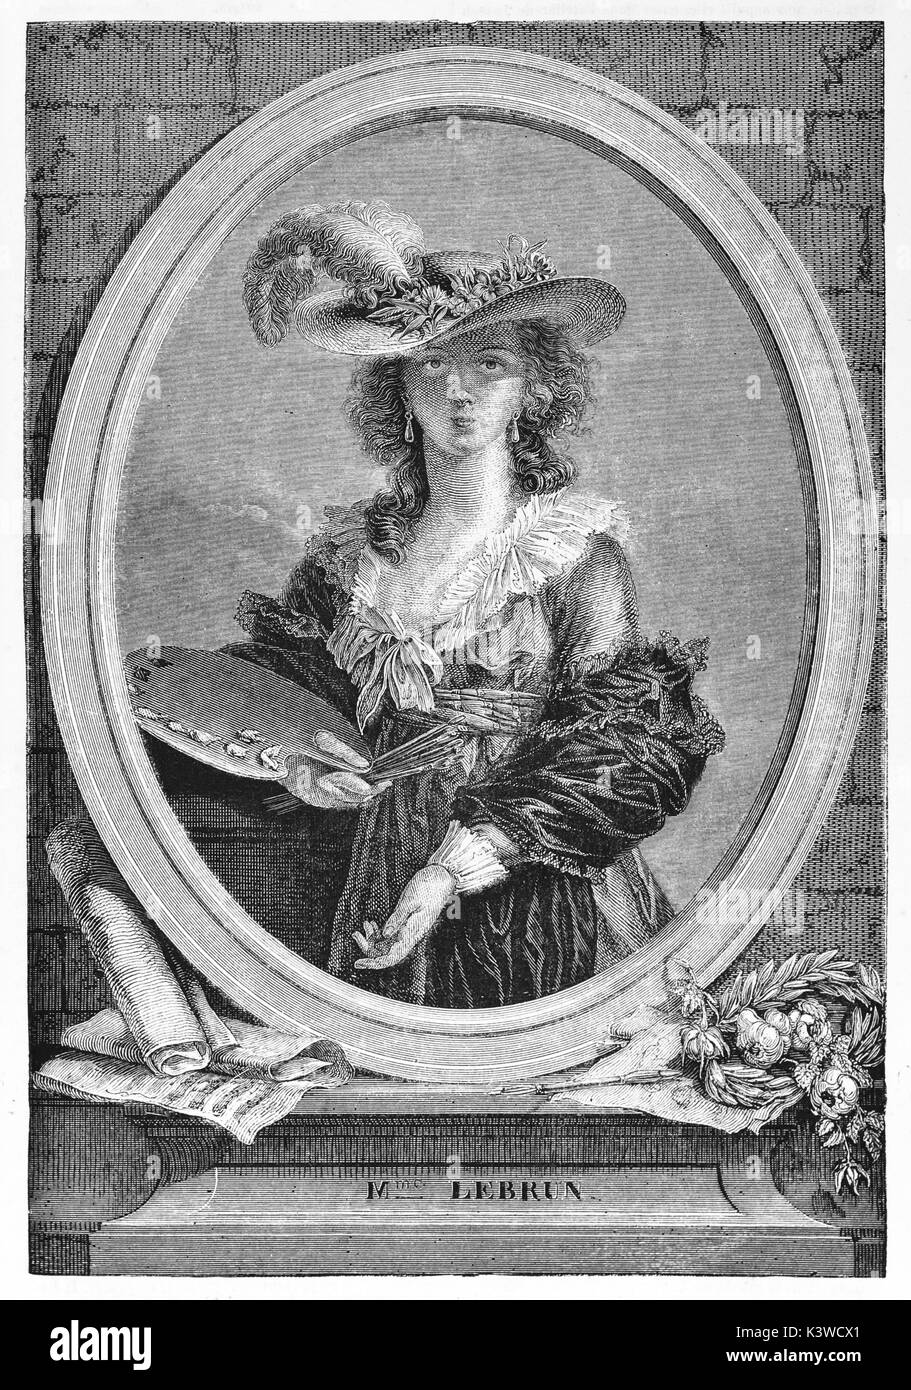 Old engraved self-portrait in a straw hat of Madame Lebrun (Louise Elisabeth Vigée Le Brun, 1755 – 1842), French painter. After herself, published on Magasin Pittoresque, Paris, 1841 Stock Photo